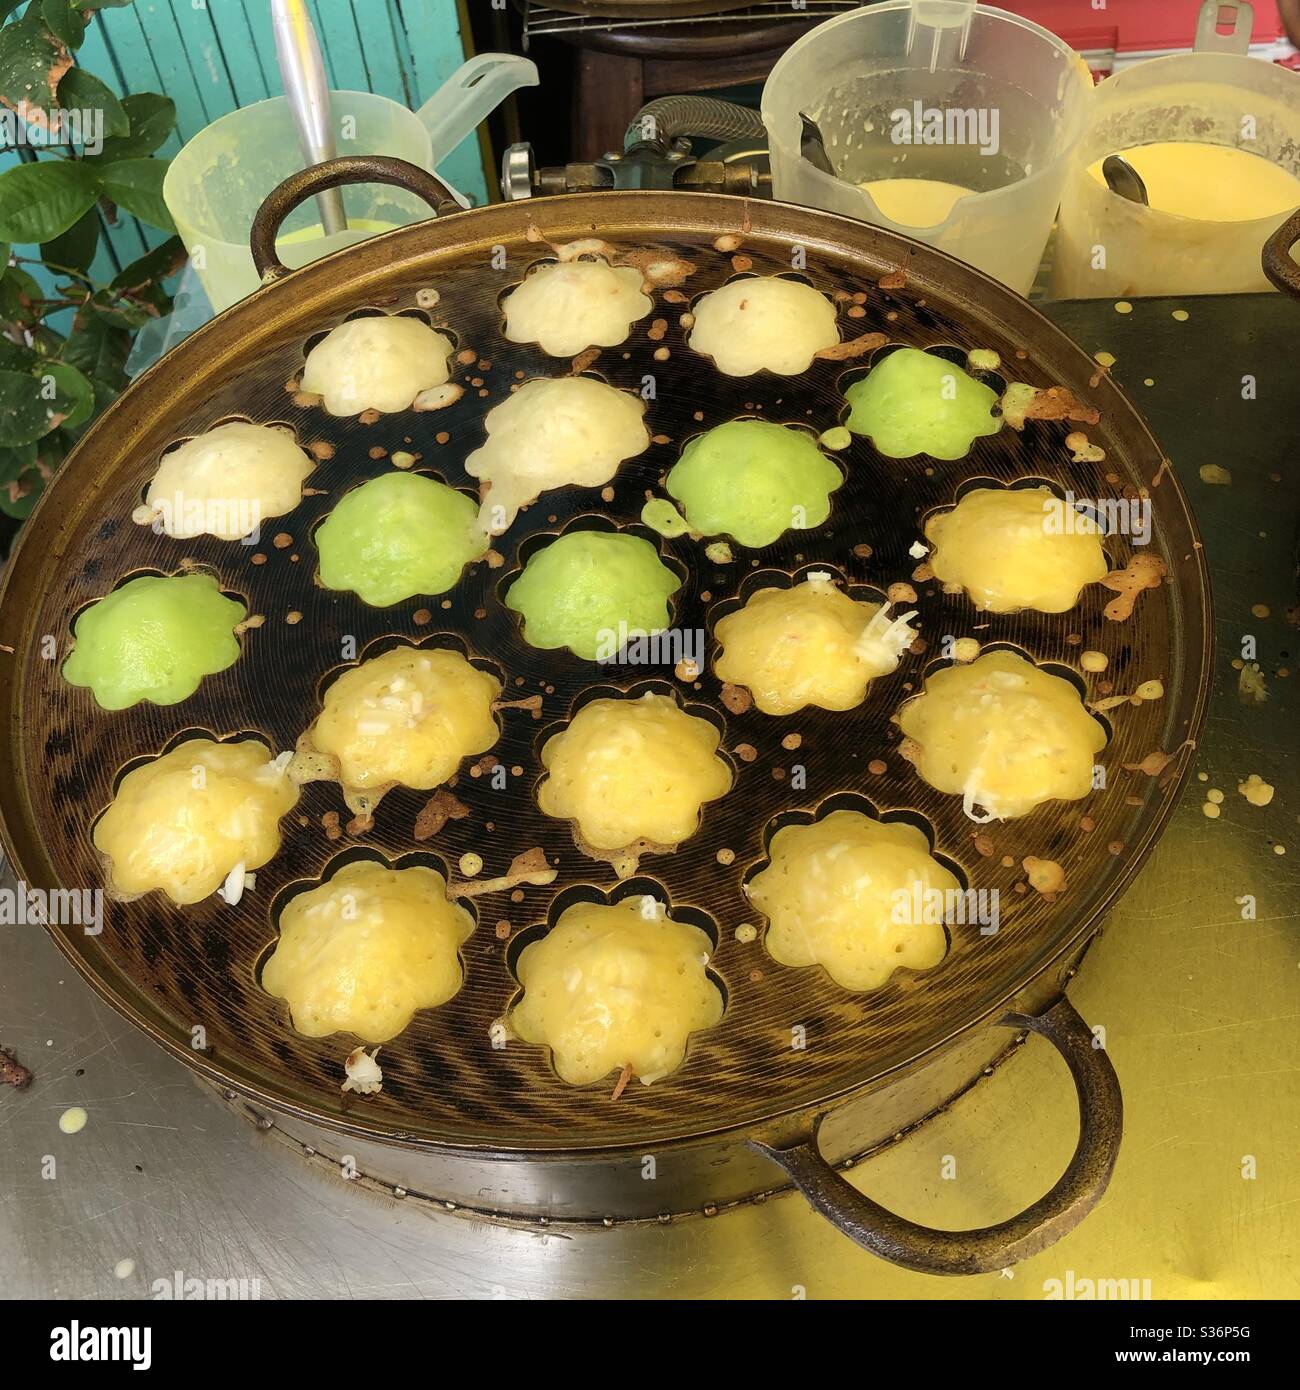 Thai dessert, A variety of coconut cakes in different flavor: Pandan cake in green, Palm cake in yellow and original in white. Stock Photo